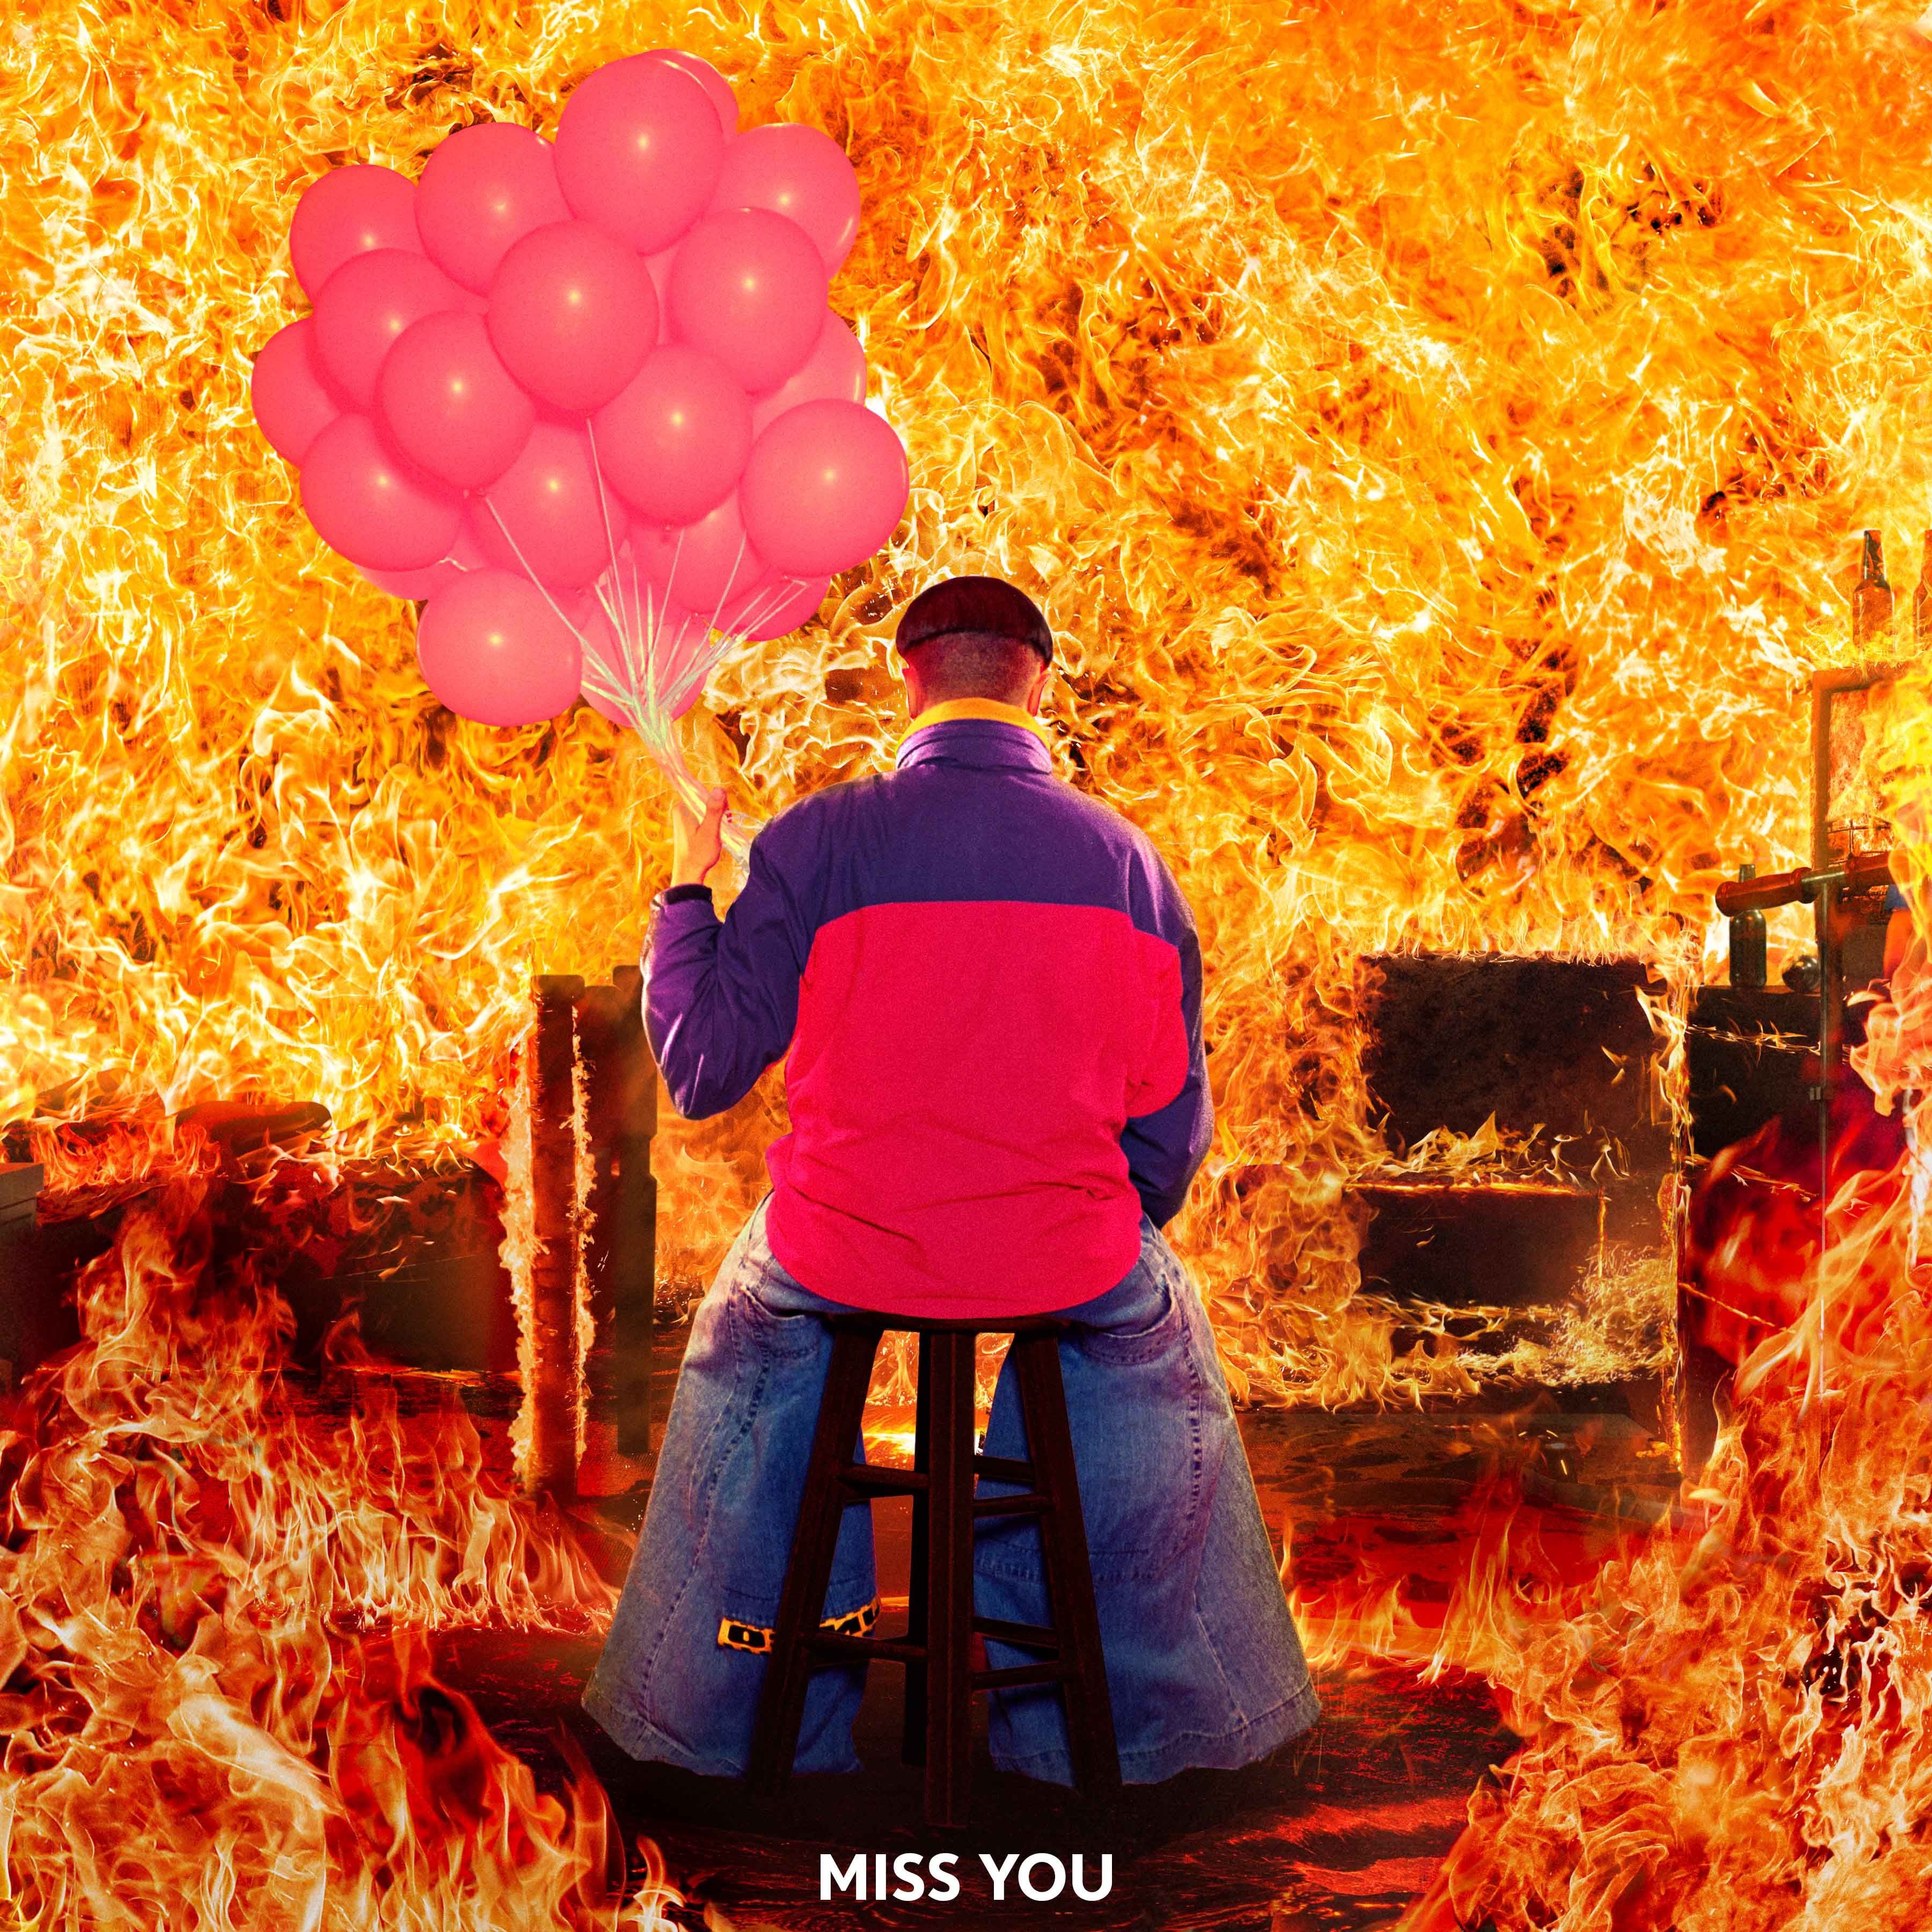 Aflaai Oliver Tree & Robin Schulz - Miss You